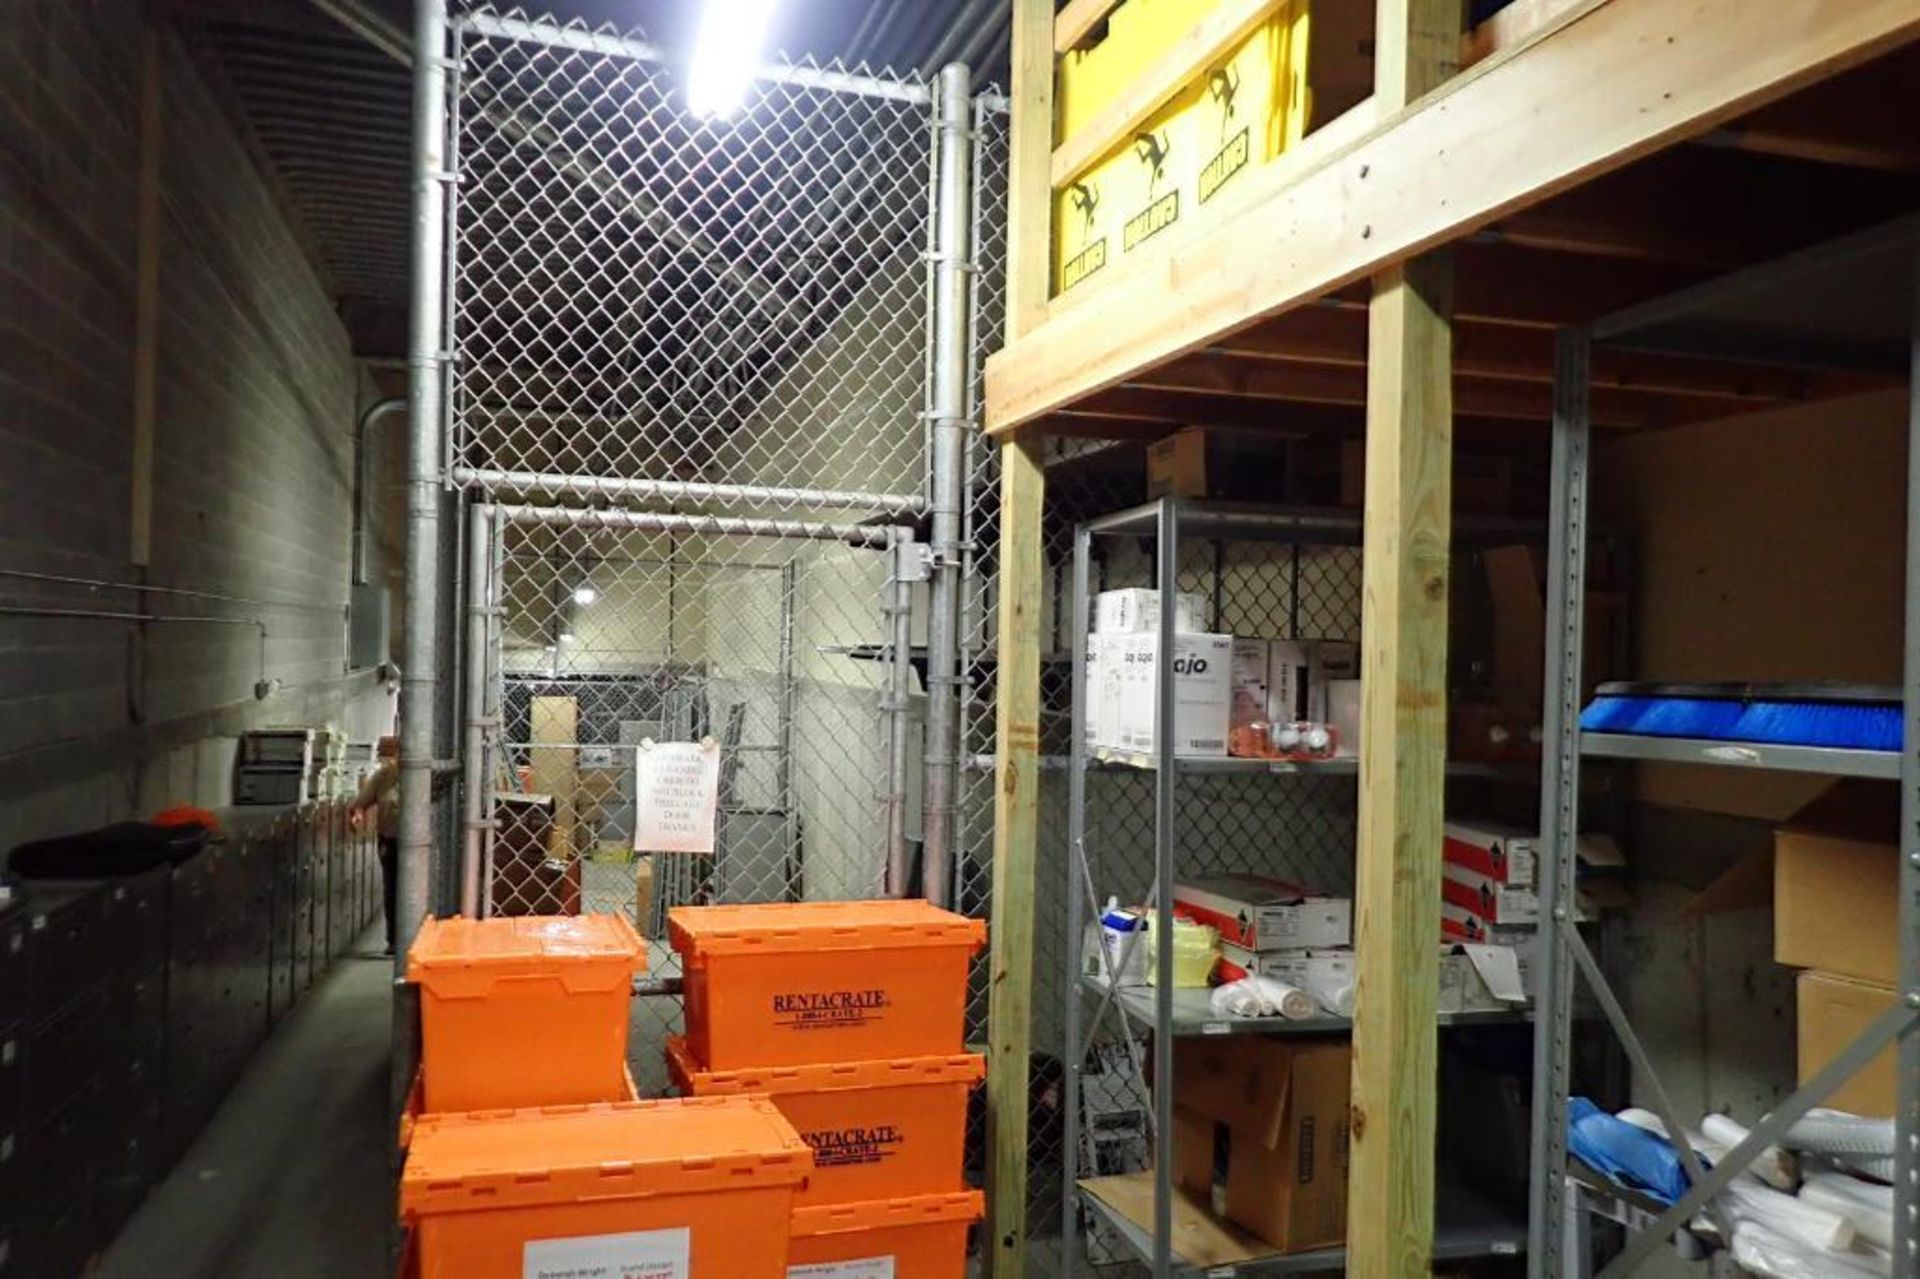 Chain-link fence and shelving - Image 4 of 6